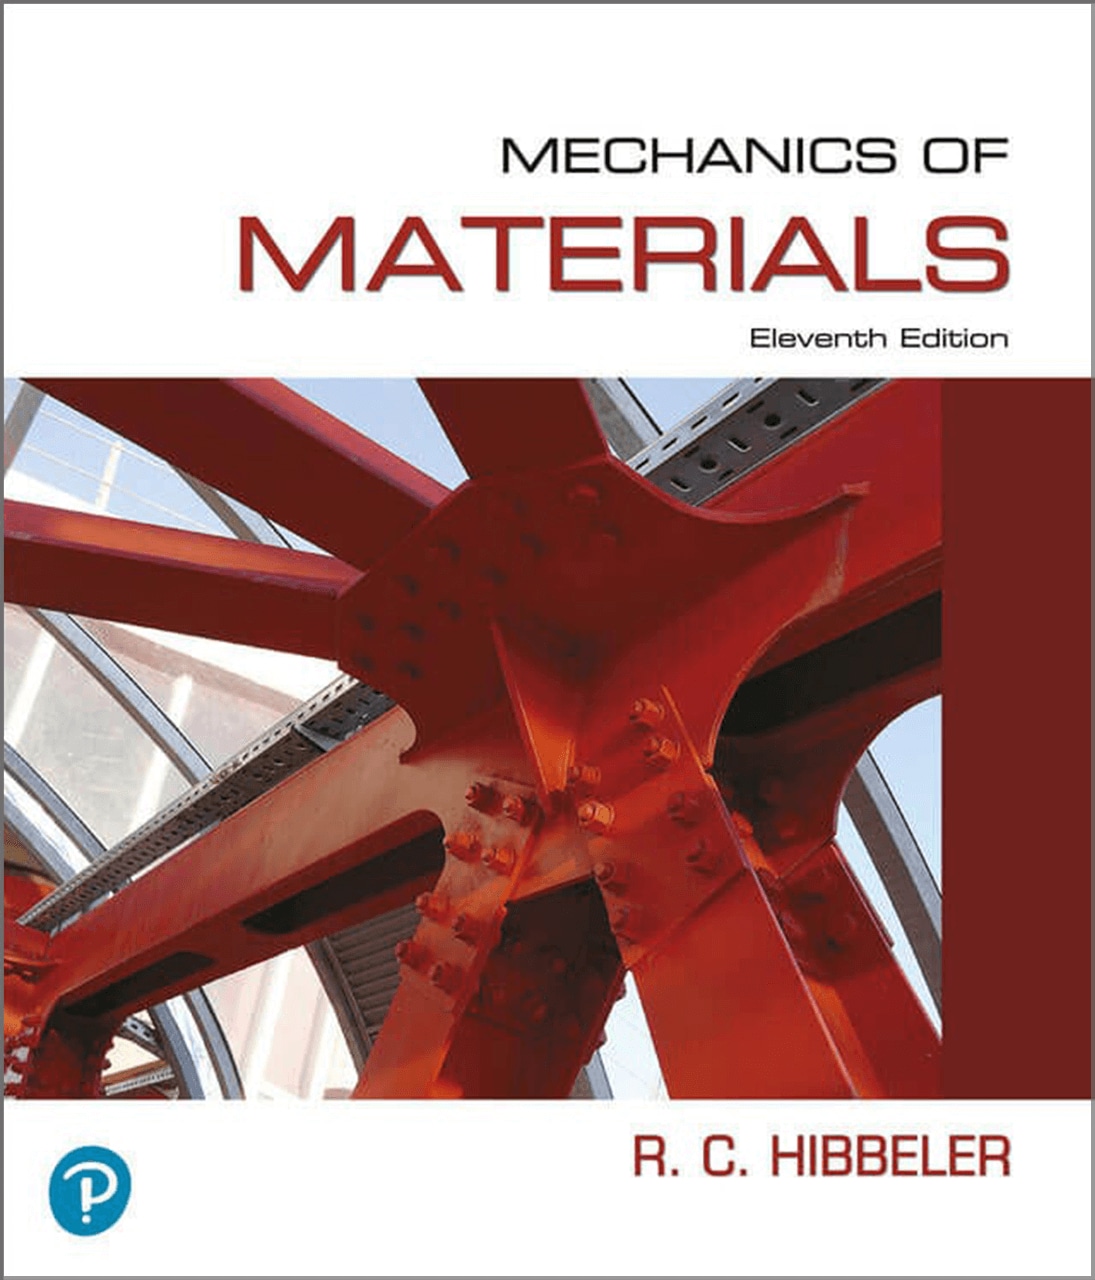 Mechanics of Materials, 11th Edition book cover